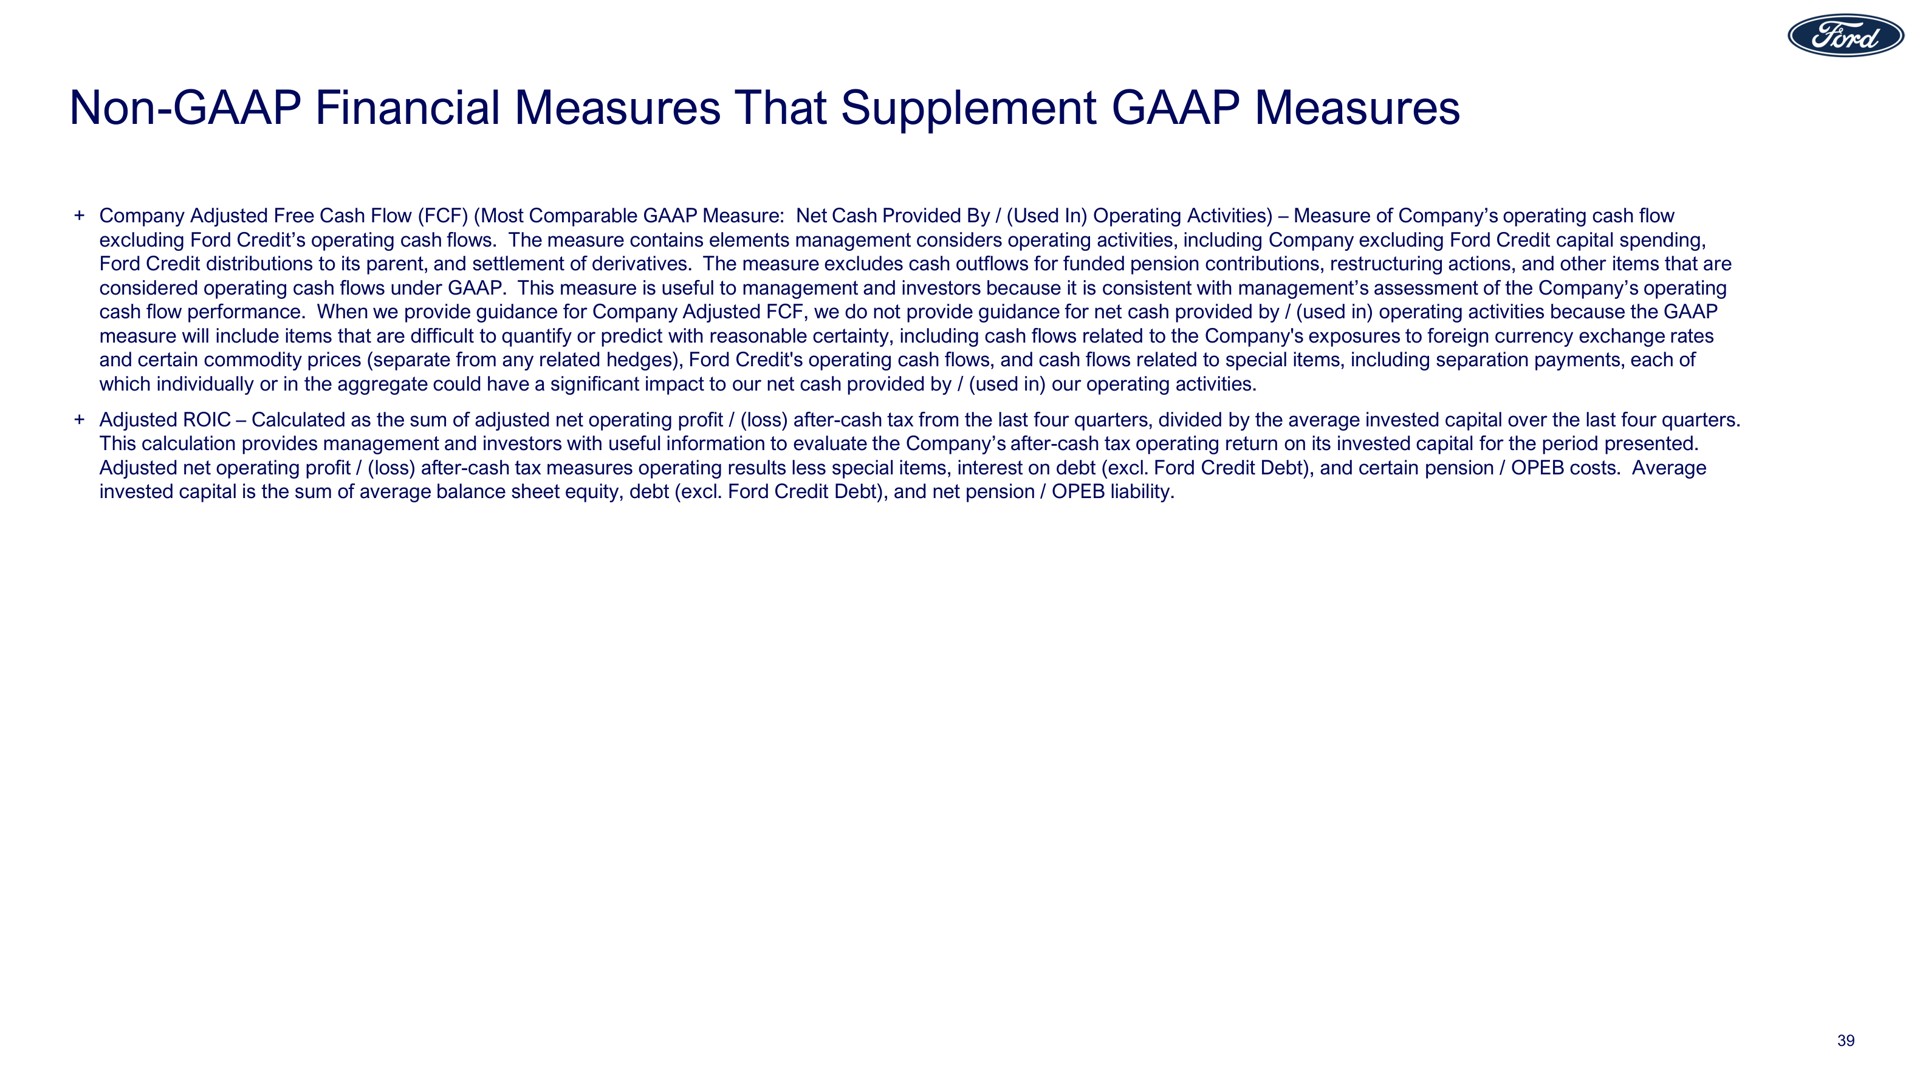 non financial measures that supplement measures | Ford